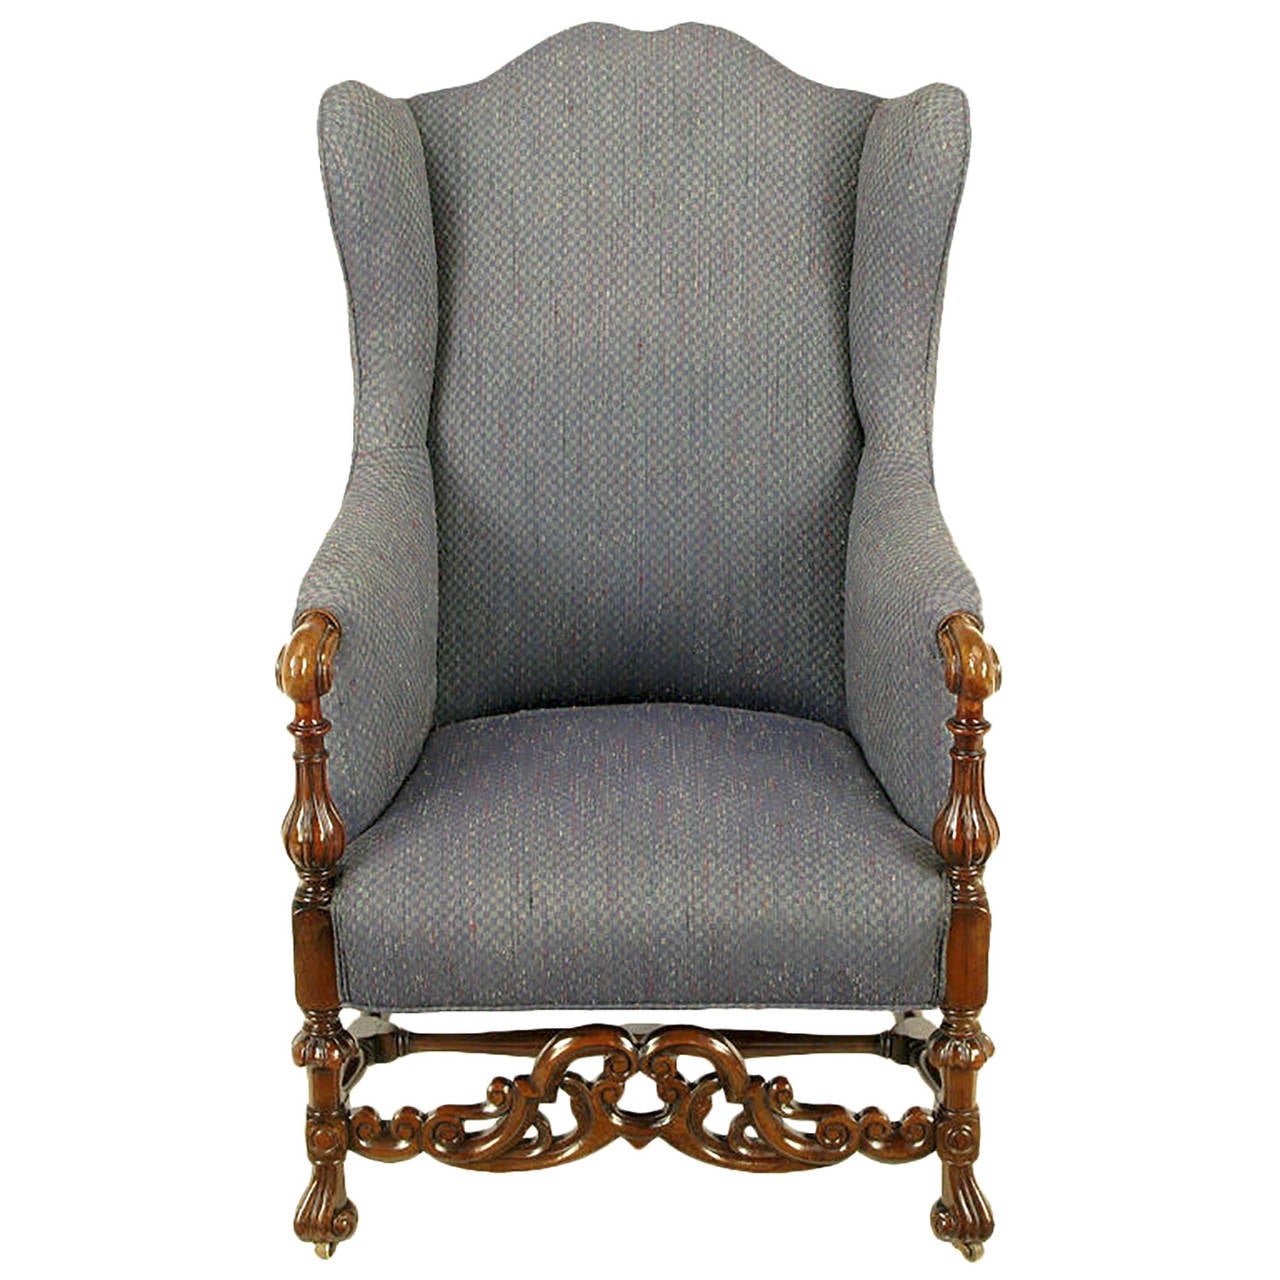 Italian 19th century style wing chair. Heavily carved front apron and arms through the front legs. Carved middle and side stretchers and back legs. Upholstered in a charcoal blue wool silk blend. Muted checked pattern heathered with red, light blue